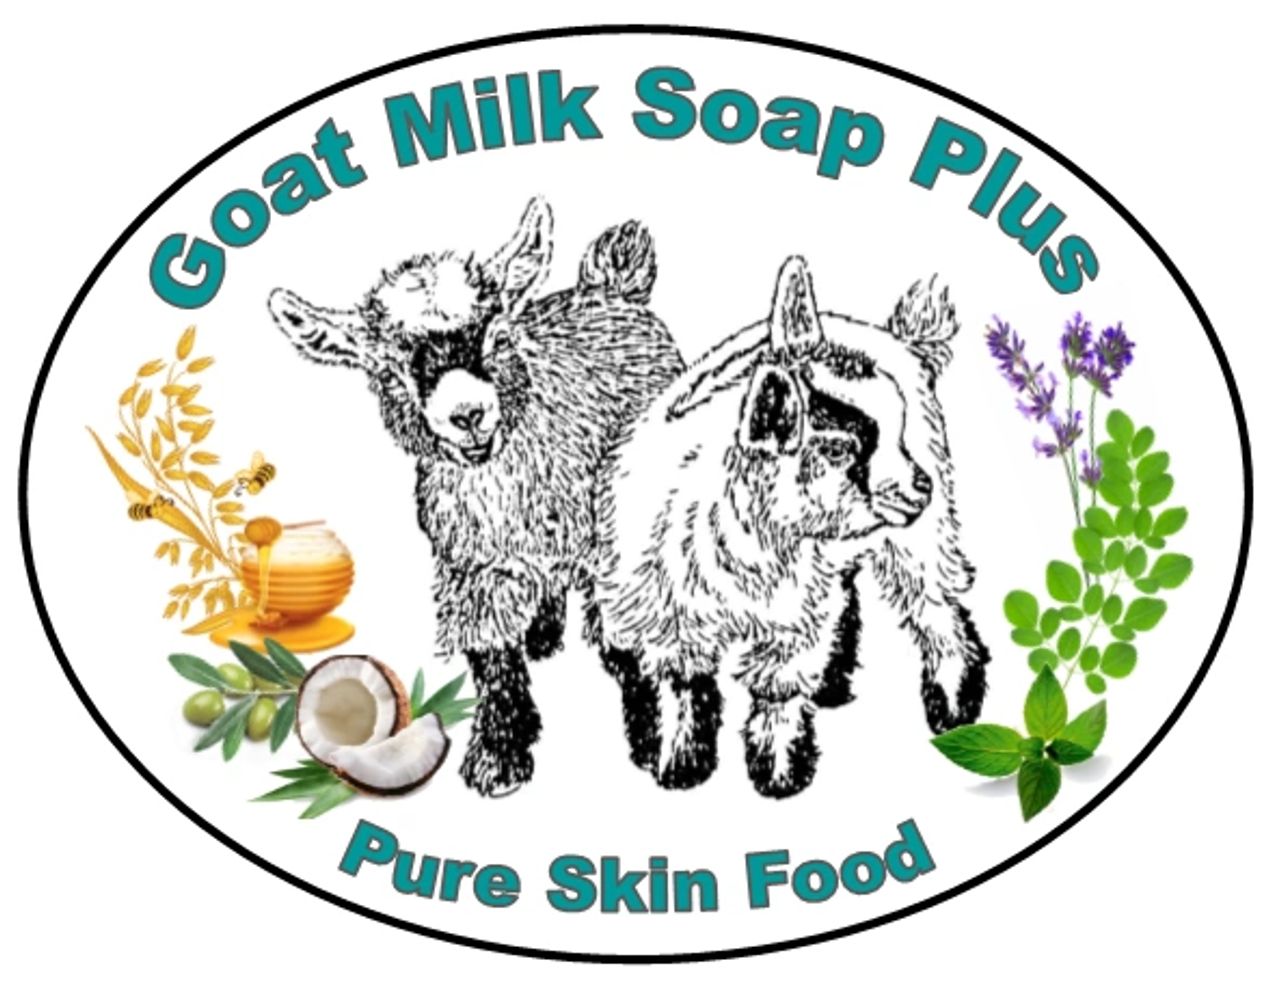 Purity Unscented Goat Milk Soap for Healthy Skin - Goat Milk Stuff